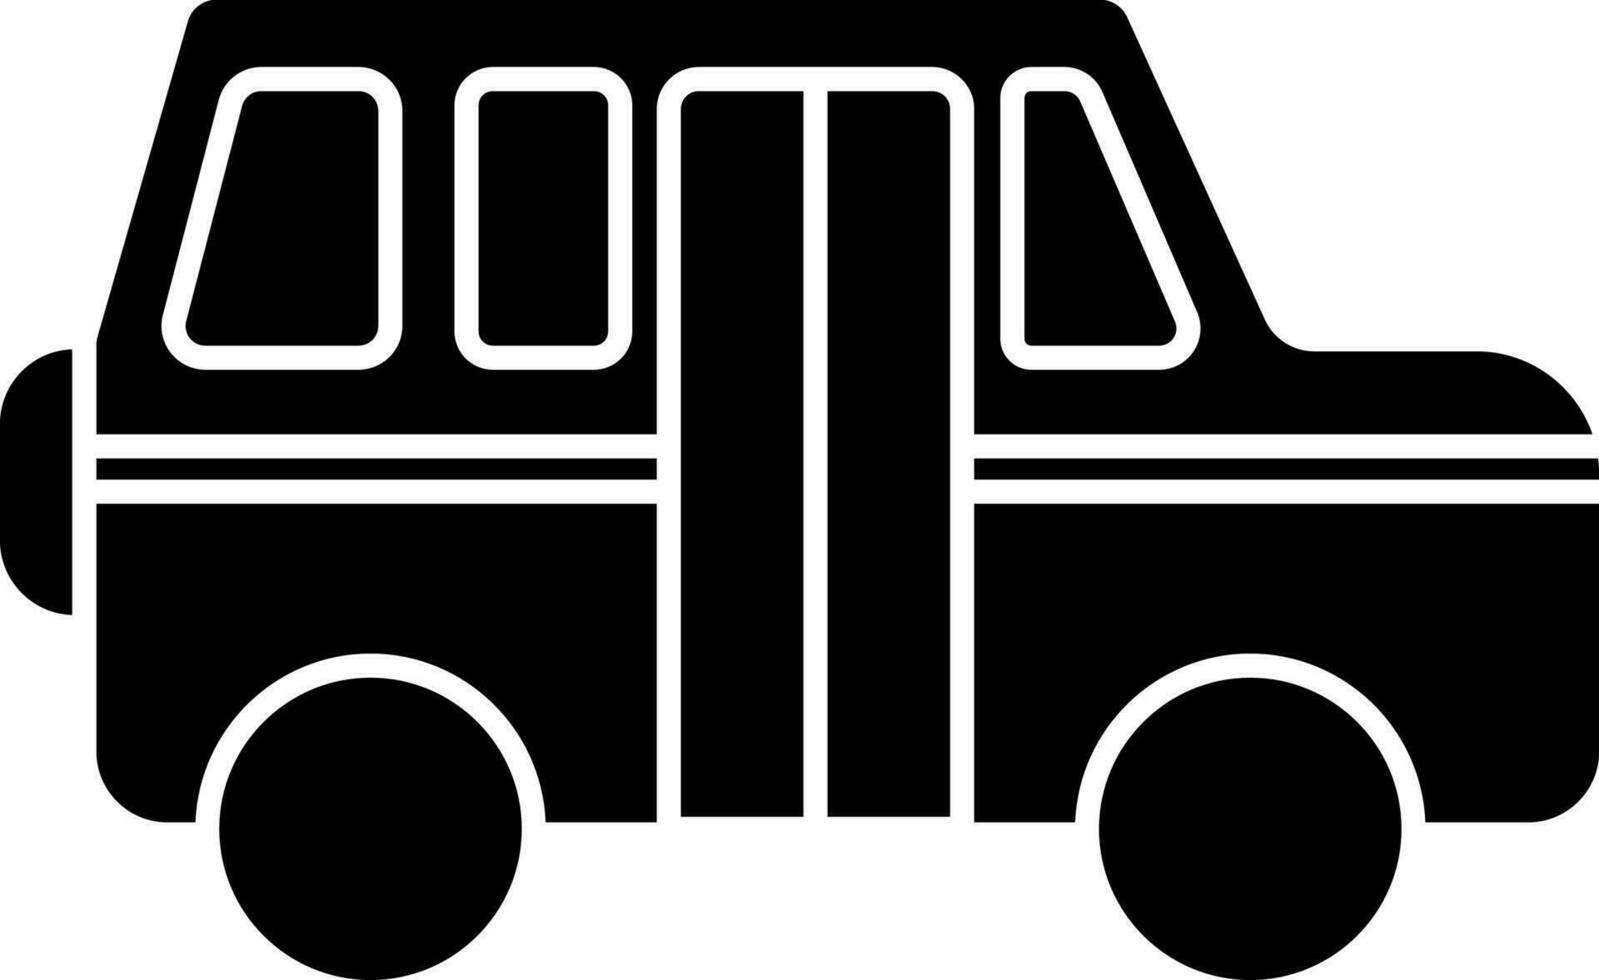 Black and White taxi car in flat style. Glyph icon or symbol. vector